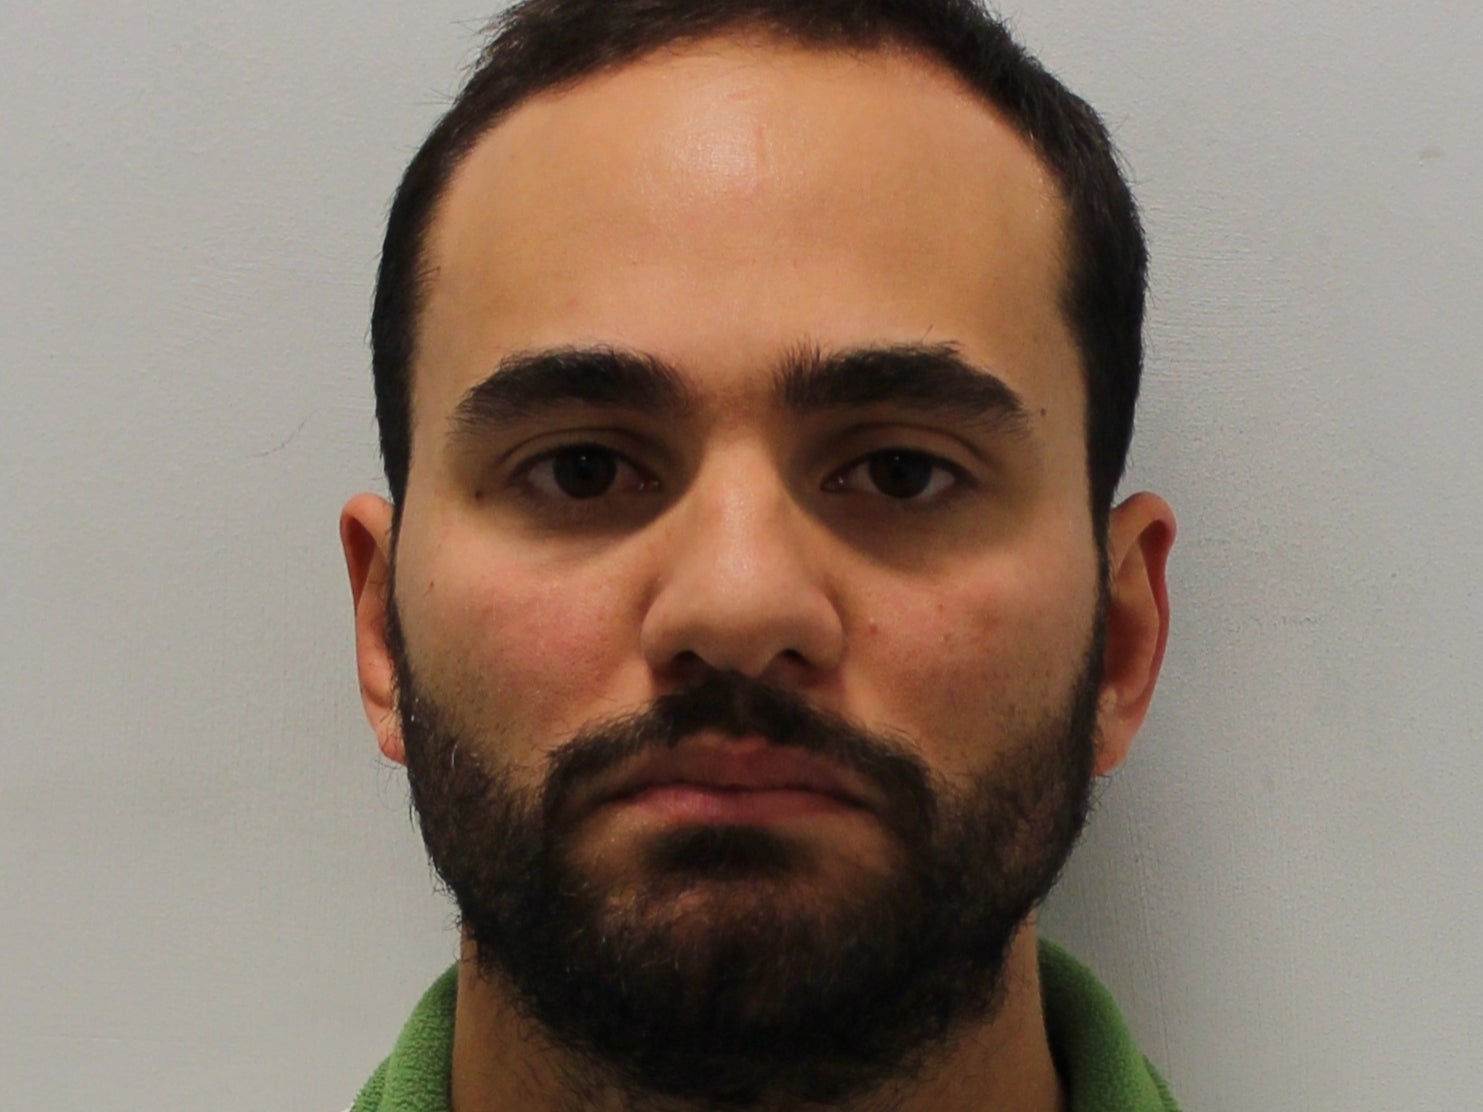 PC Isaque Rodrigues-Leite has been jailed for two years and three months